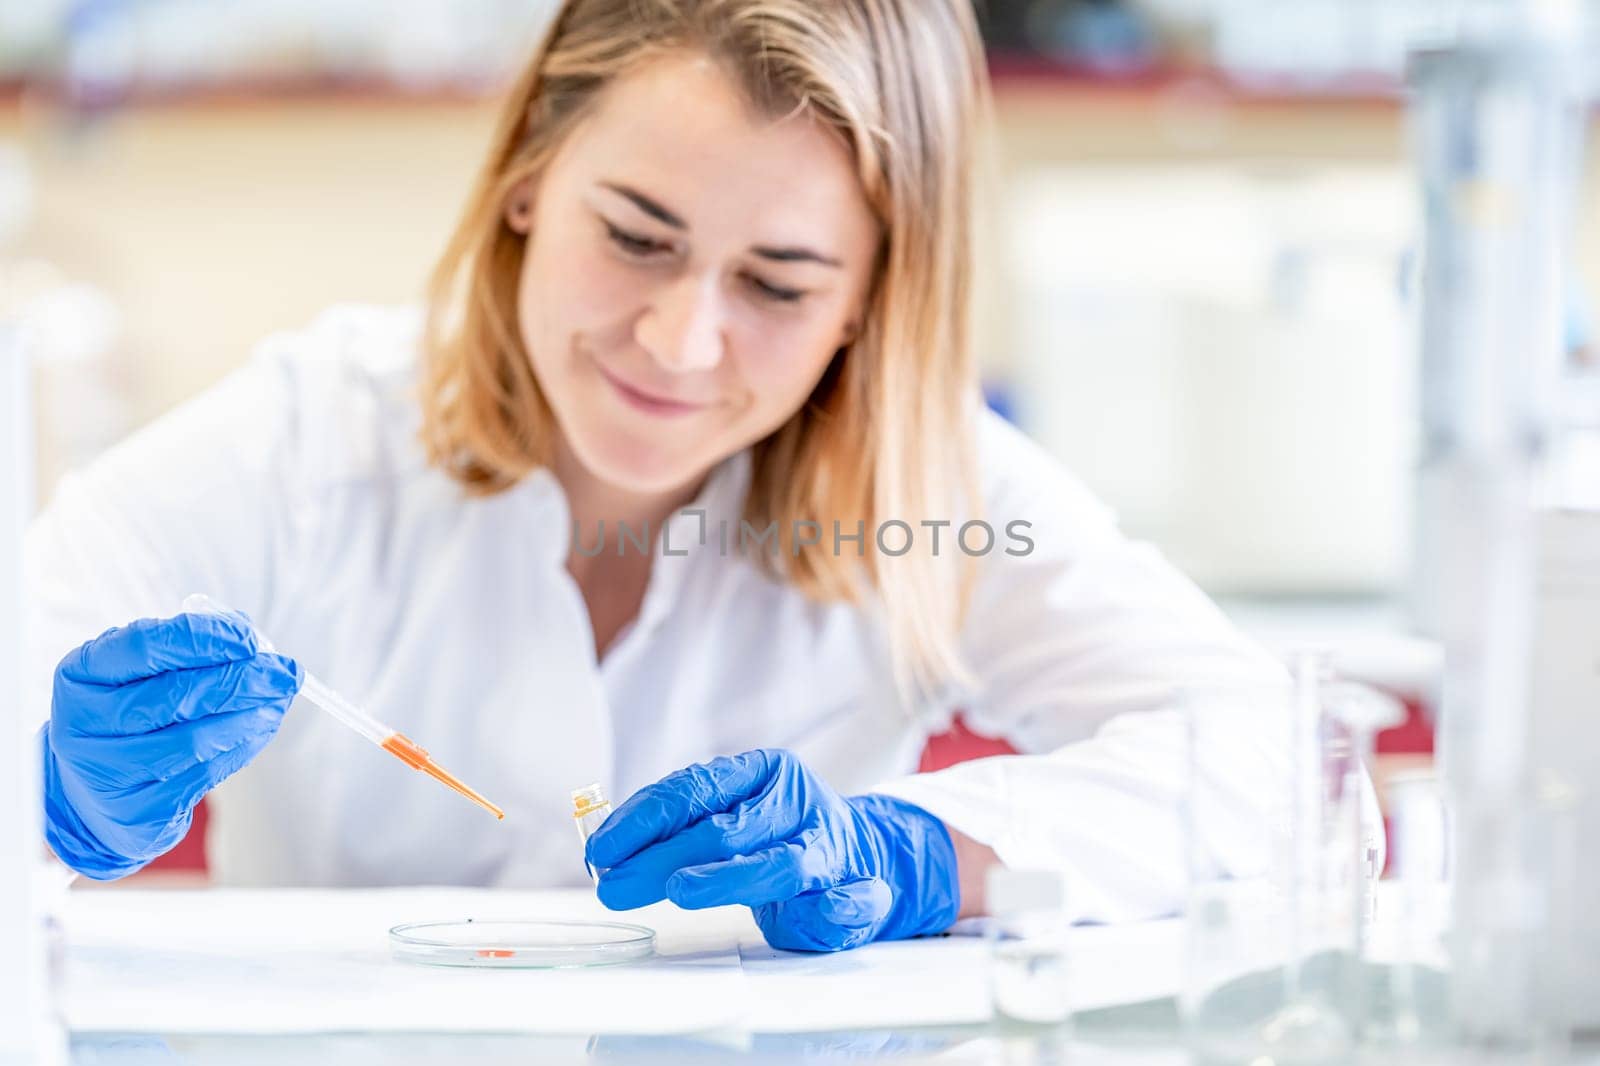 a scientist examines a chemical sample on a peri dish in a laboratory by Edophoto